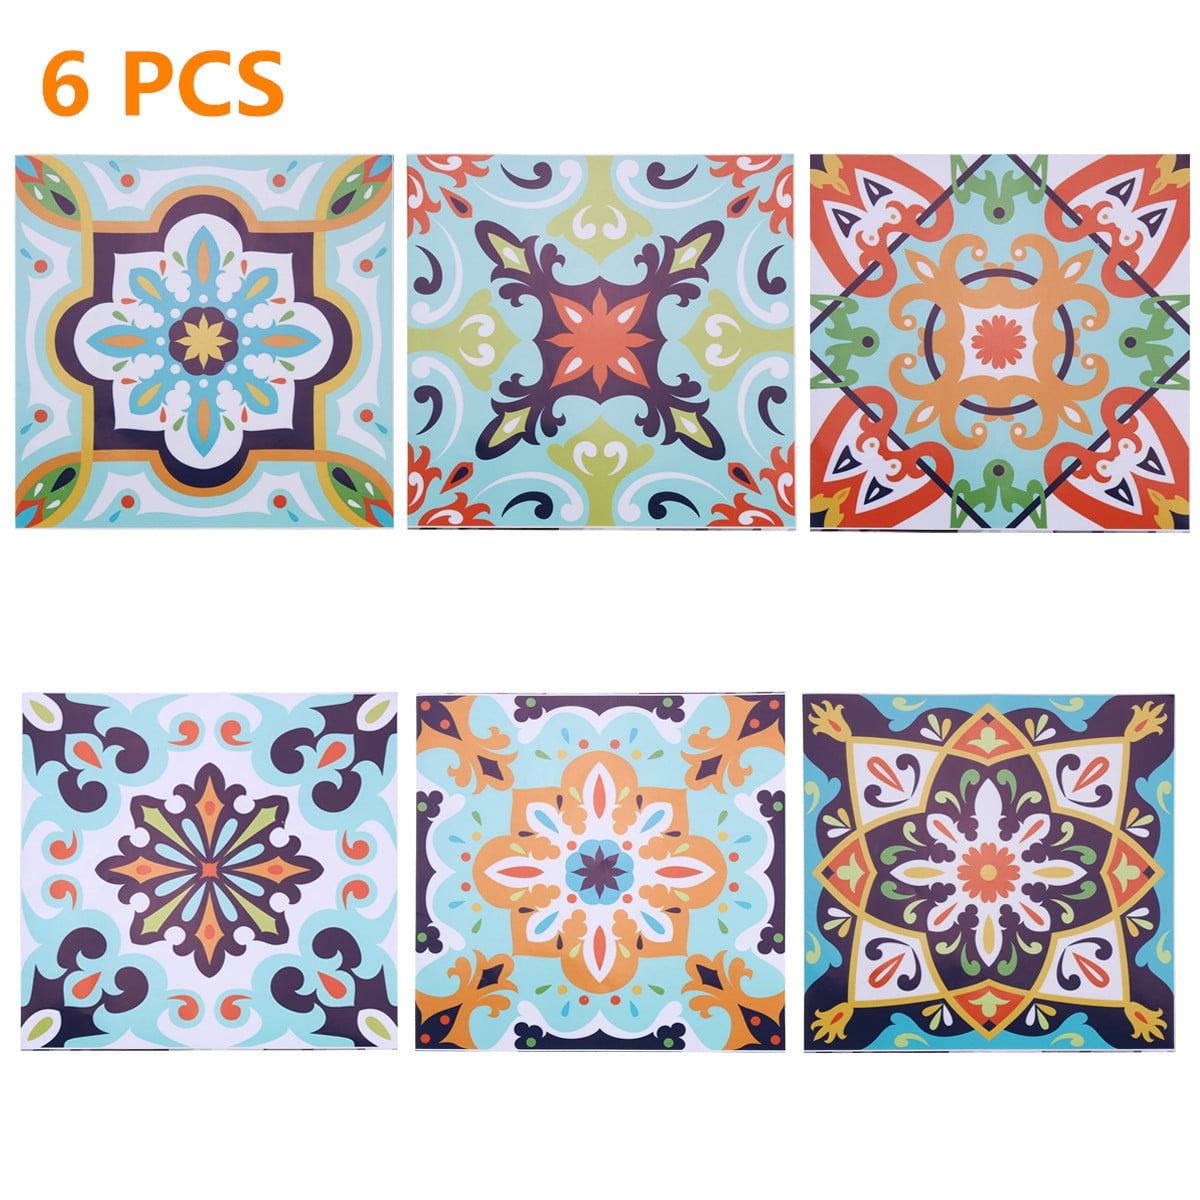 6Pcs Moroccan Style DIY Vinyl Self Adhesive Tile Wall Decal Sticker Home Decor 